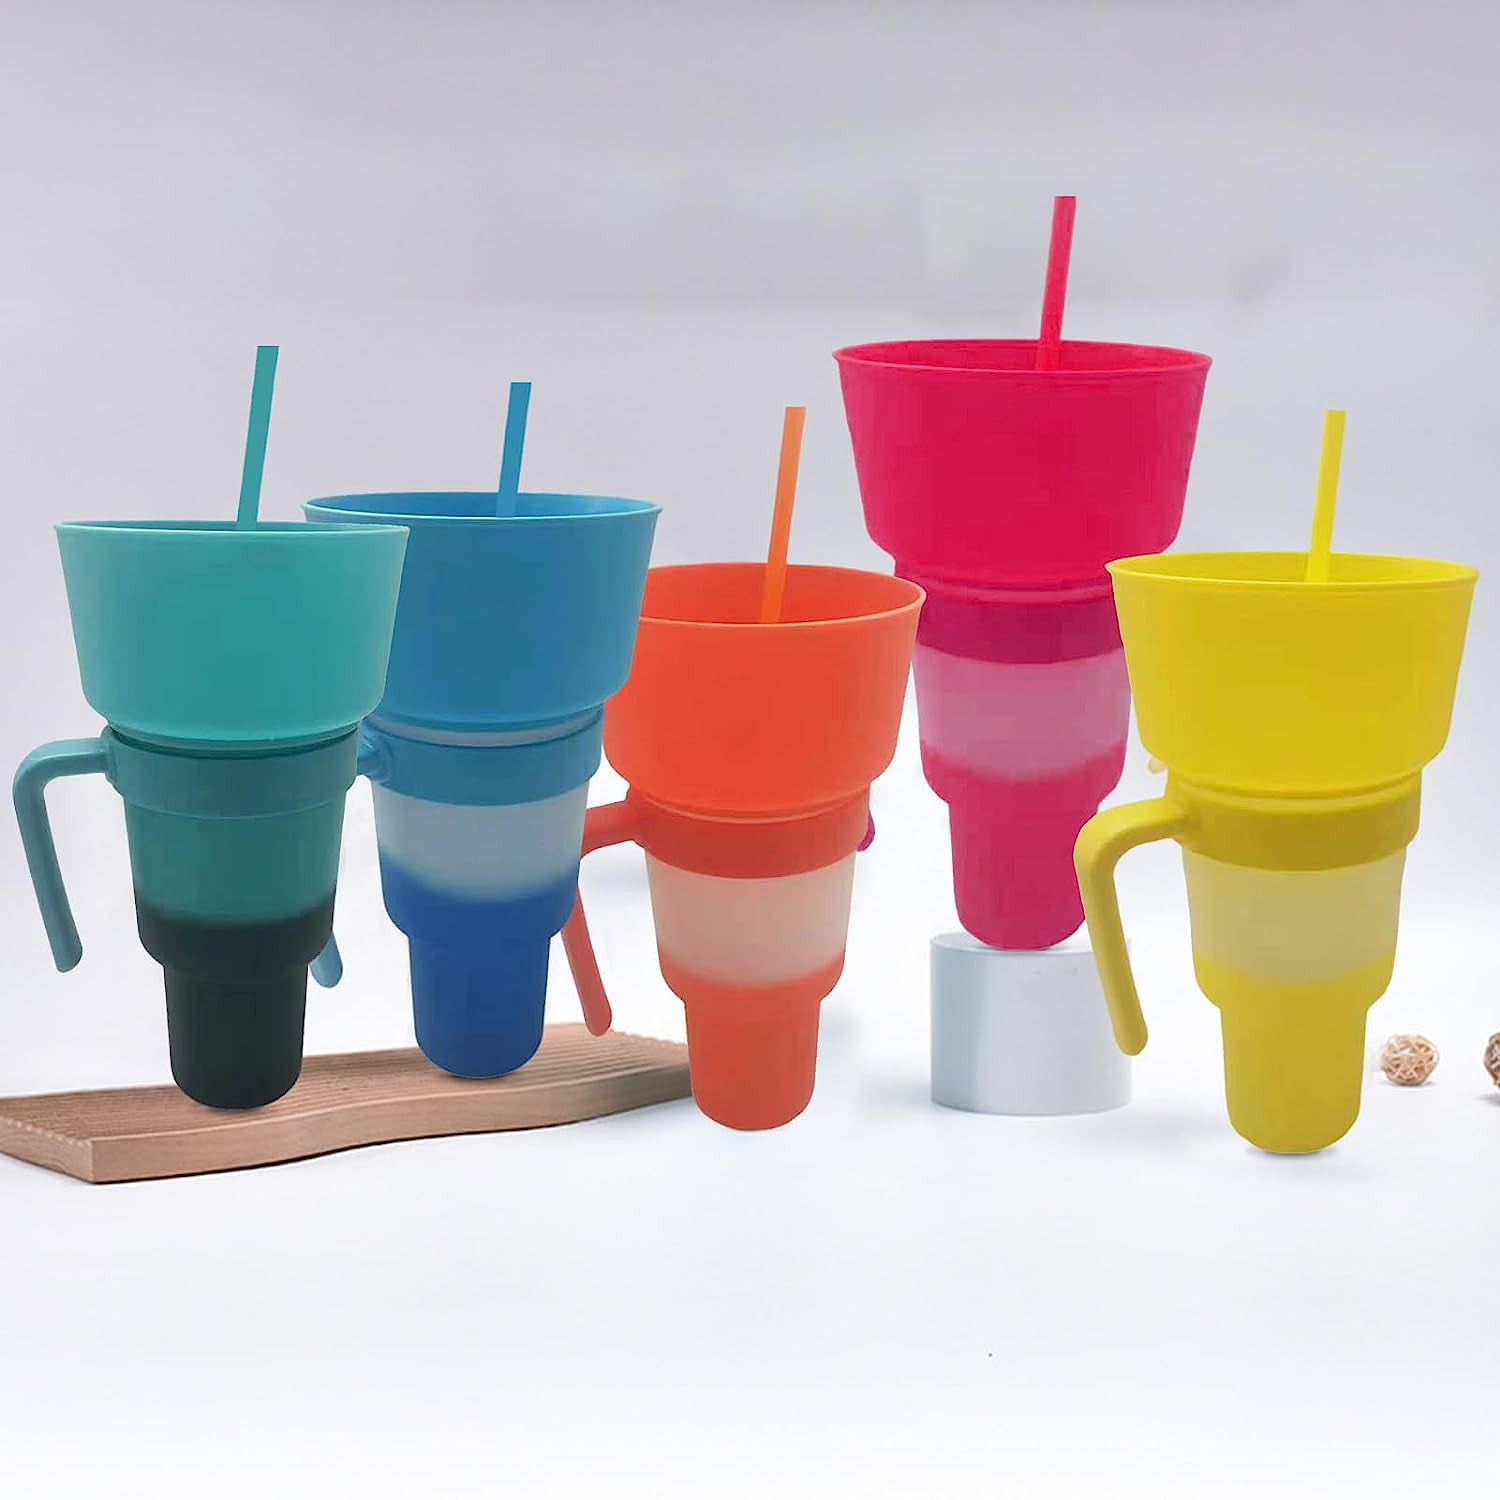 Drink Cup with Snack Bowl, 2 in 1 Drink Cup with Straw and Snack Tray,  Spill Proof Snack and Drink Cup, Portable Reusable, Suitable for Movie